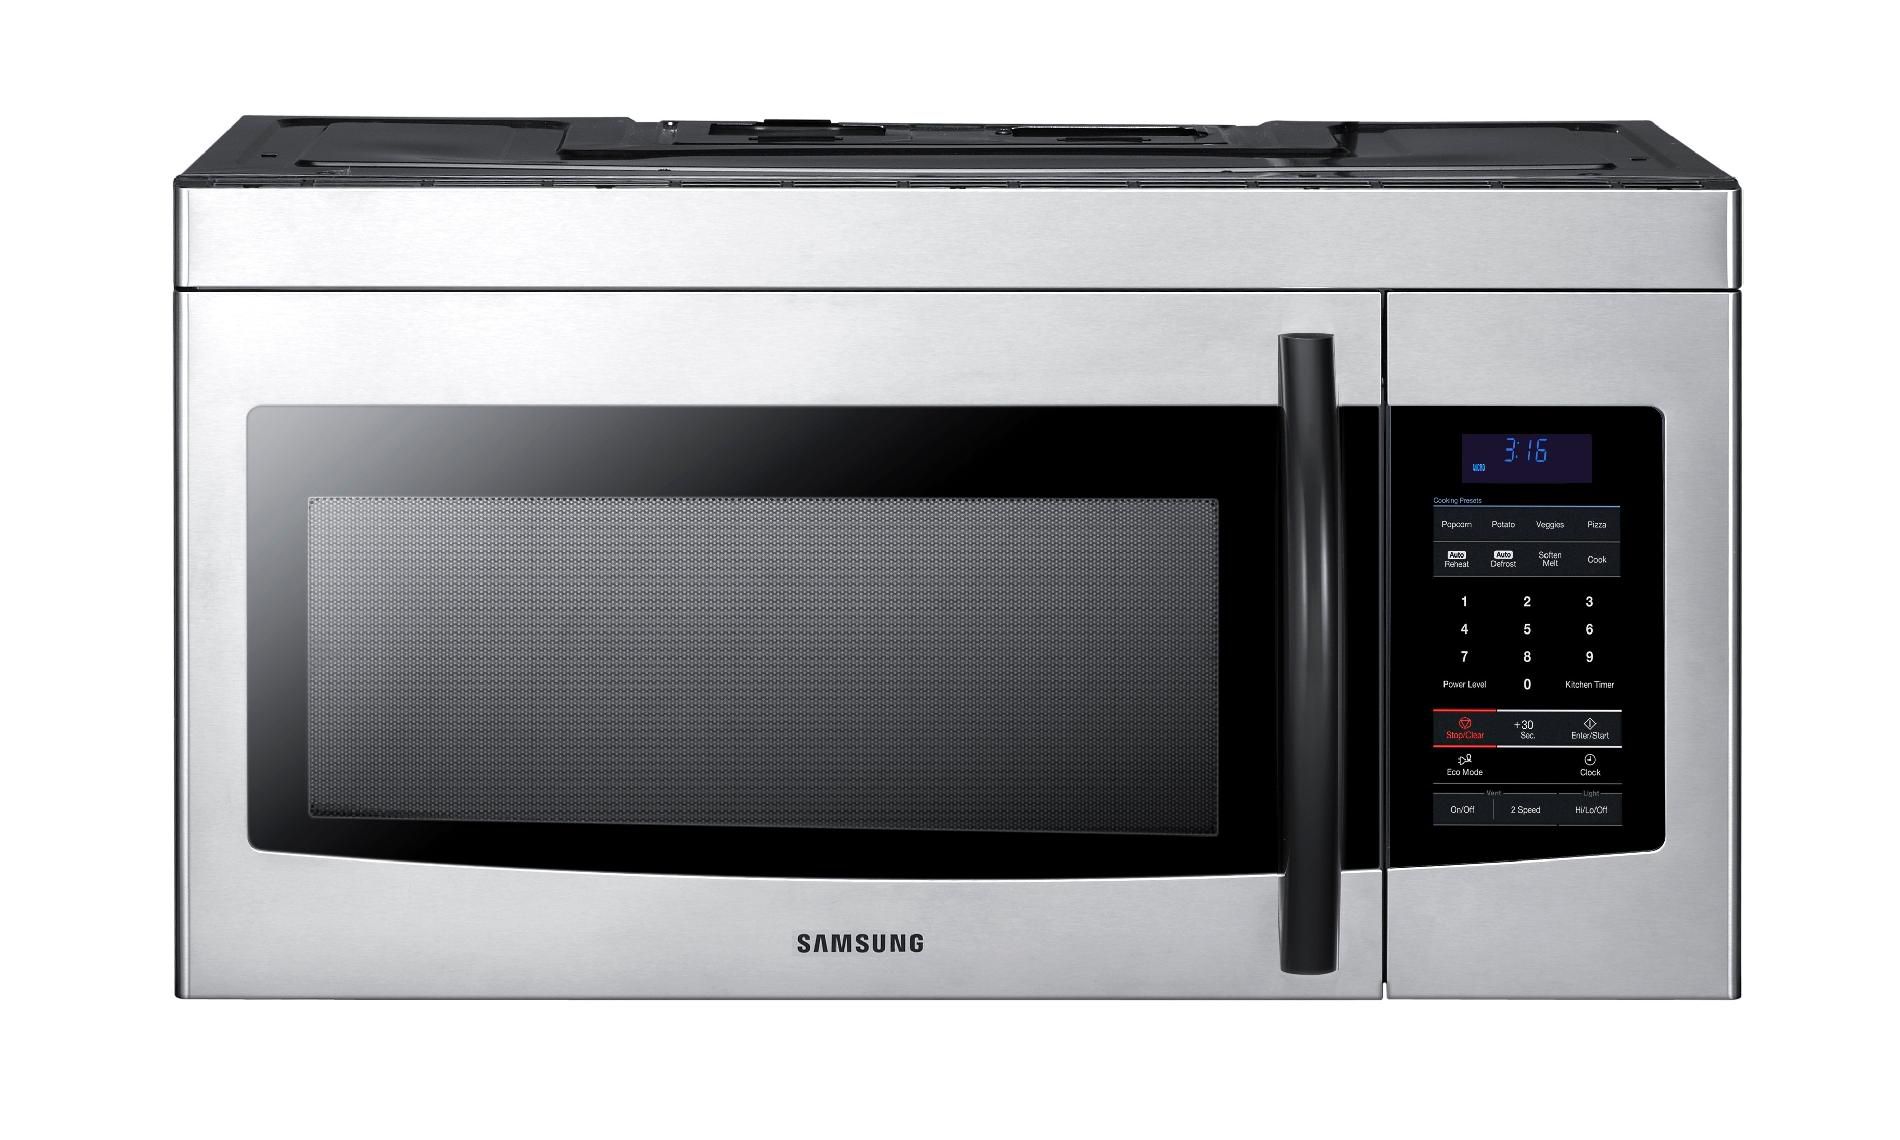 Samsung 1.6 cu. ft. Over-the-Range Microwave - Stainless Steel